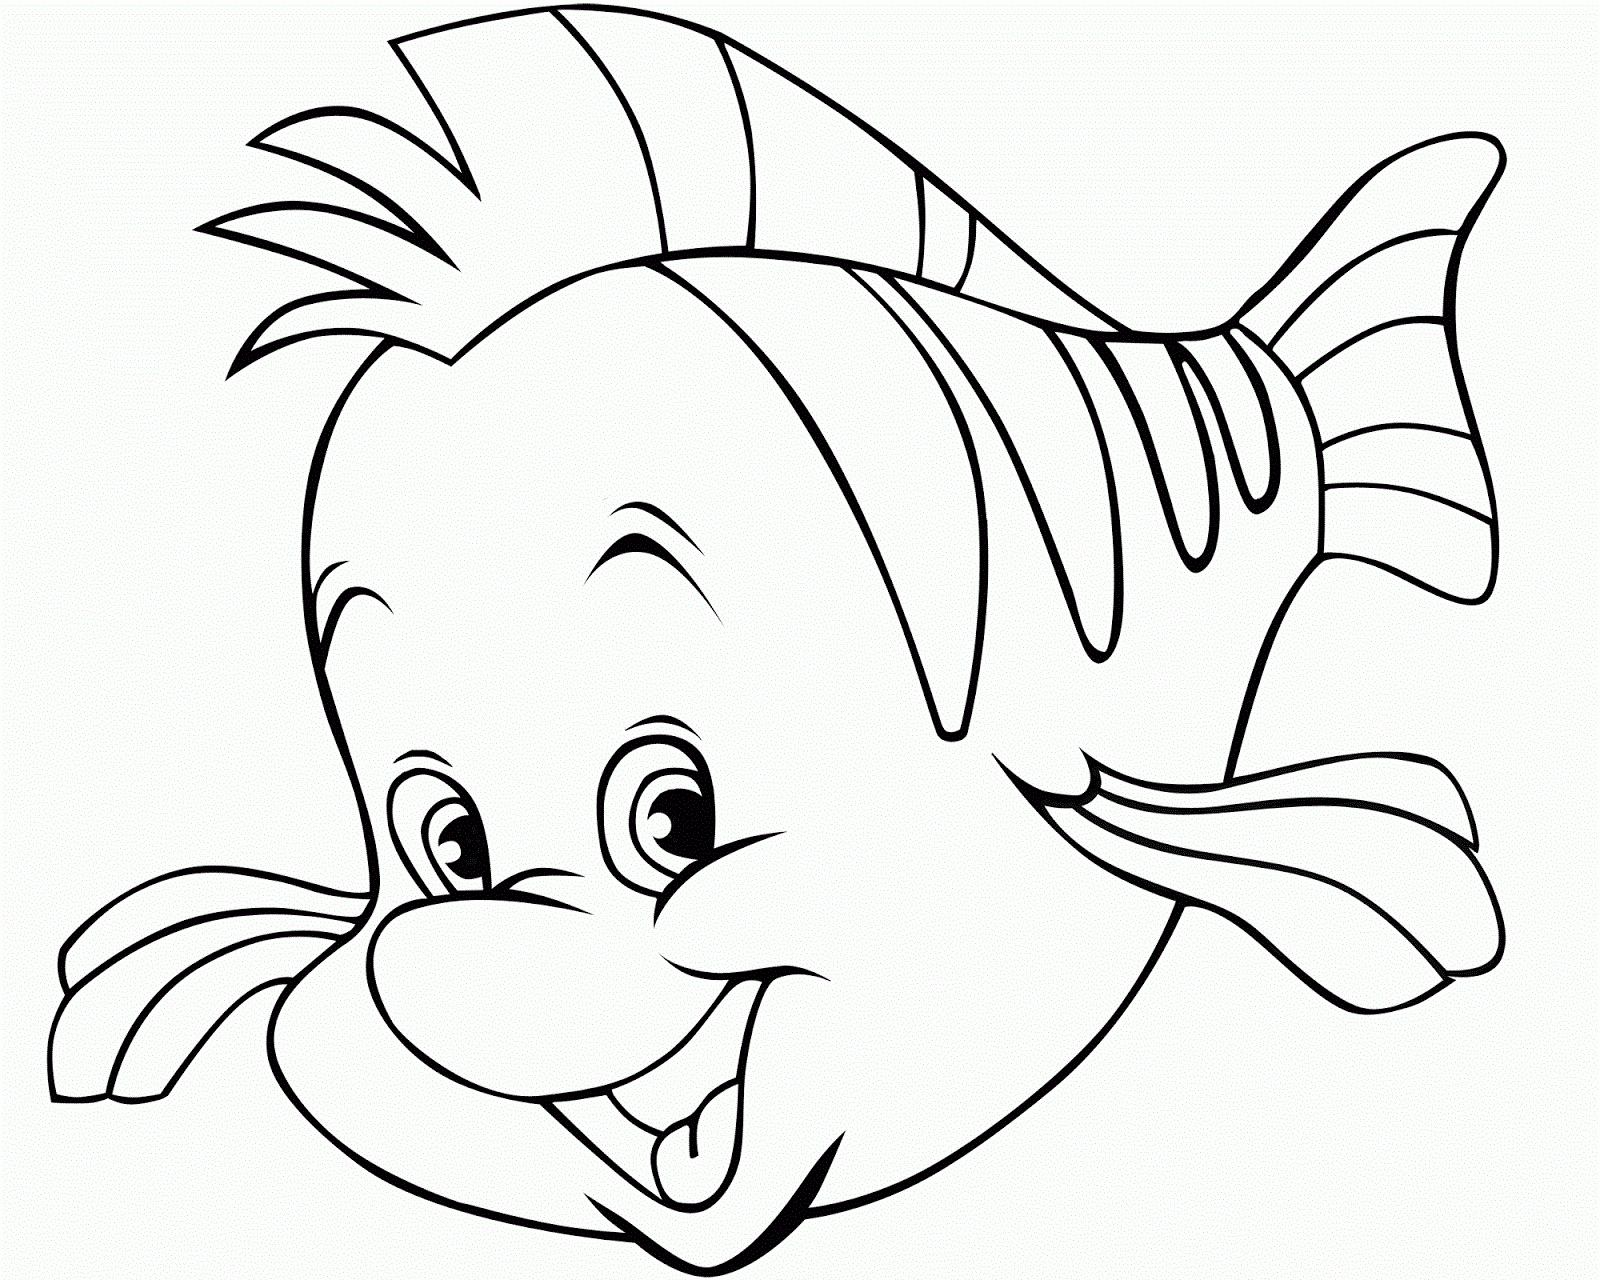 Printable Fish Colouring Pages Unique Fish Color Pages to Print